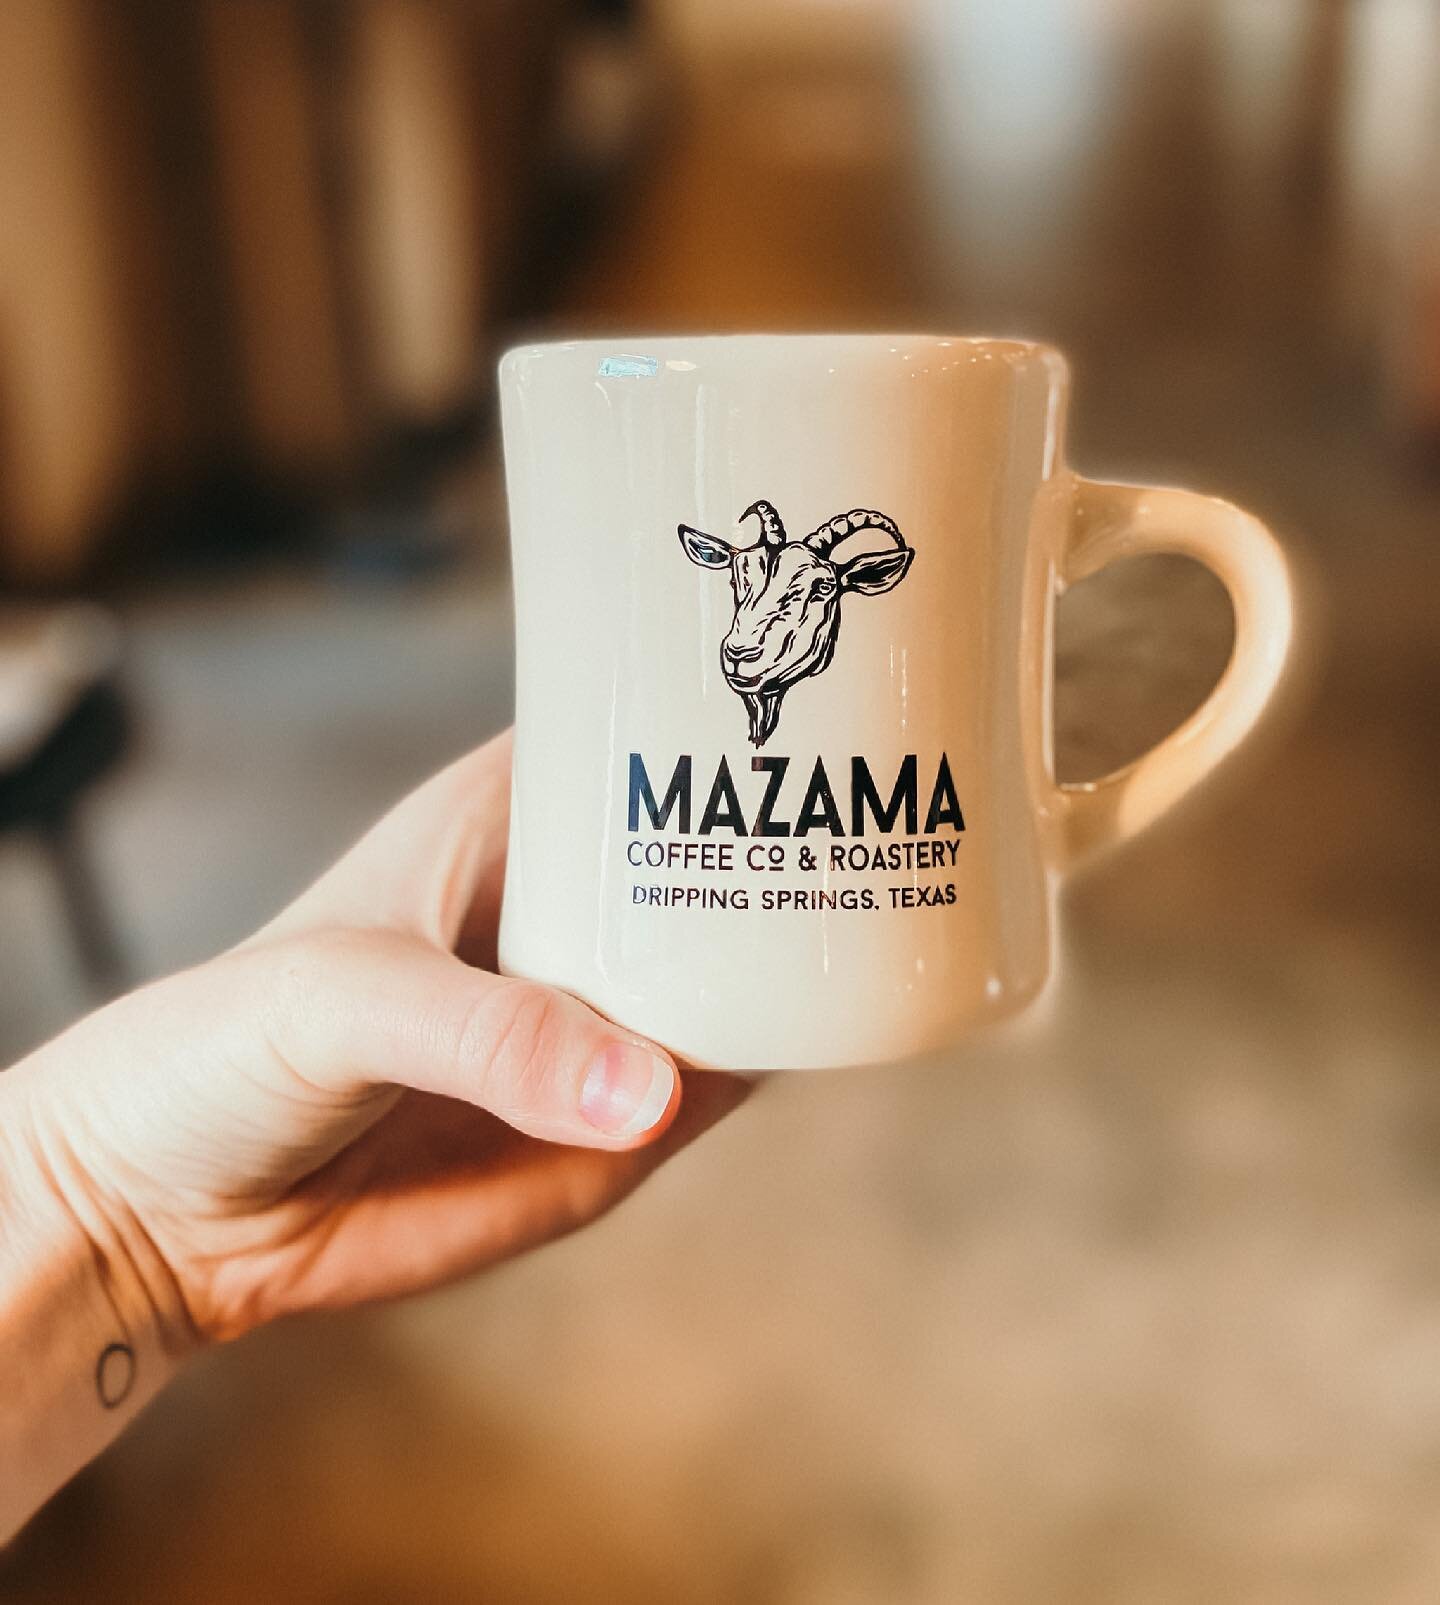 NEW! MoJoe is looking good on our new goat mugs - just in time for Father&rsquo;s Day! 

We will be CLOSED on Sunday, June 20 for Father&rsquo;s Day! 

#mazamacoffee